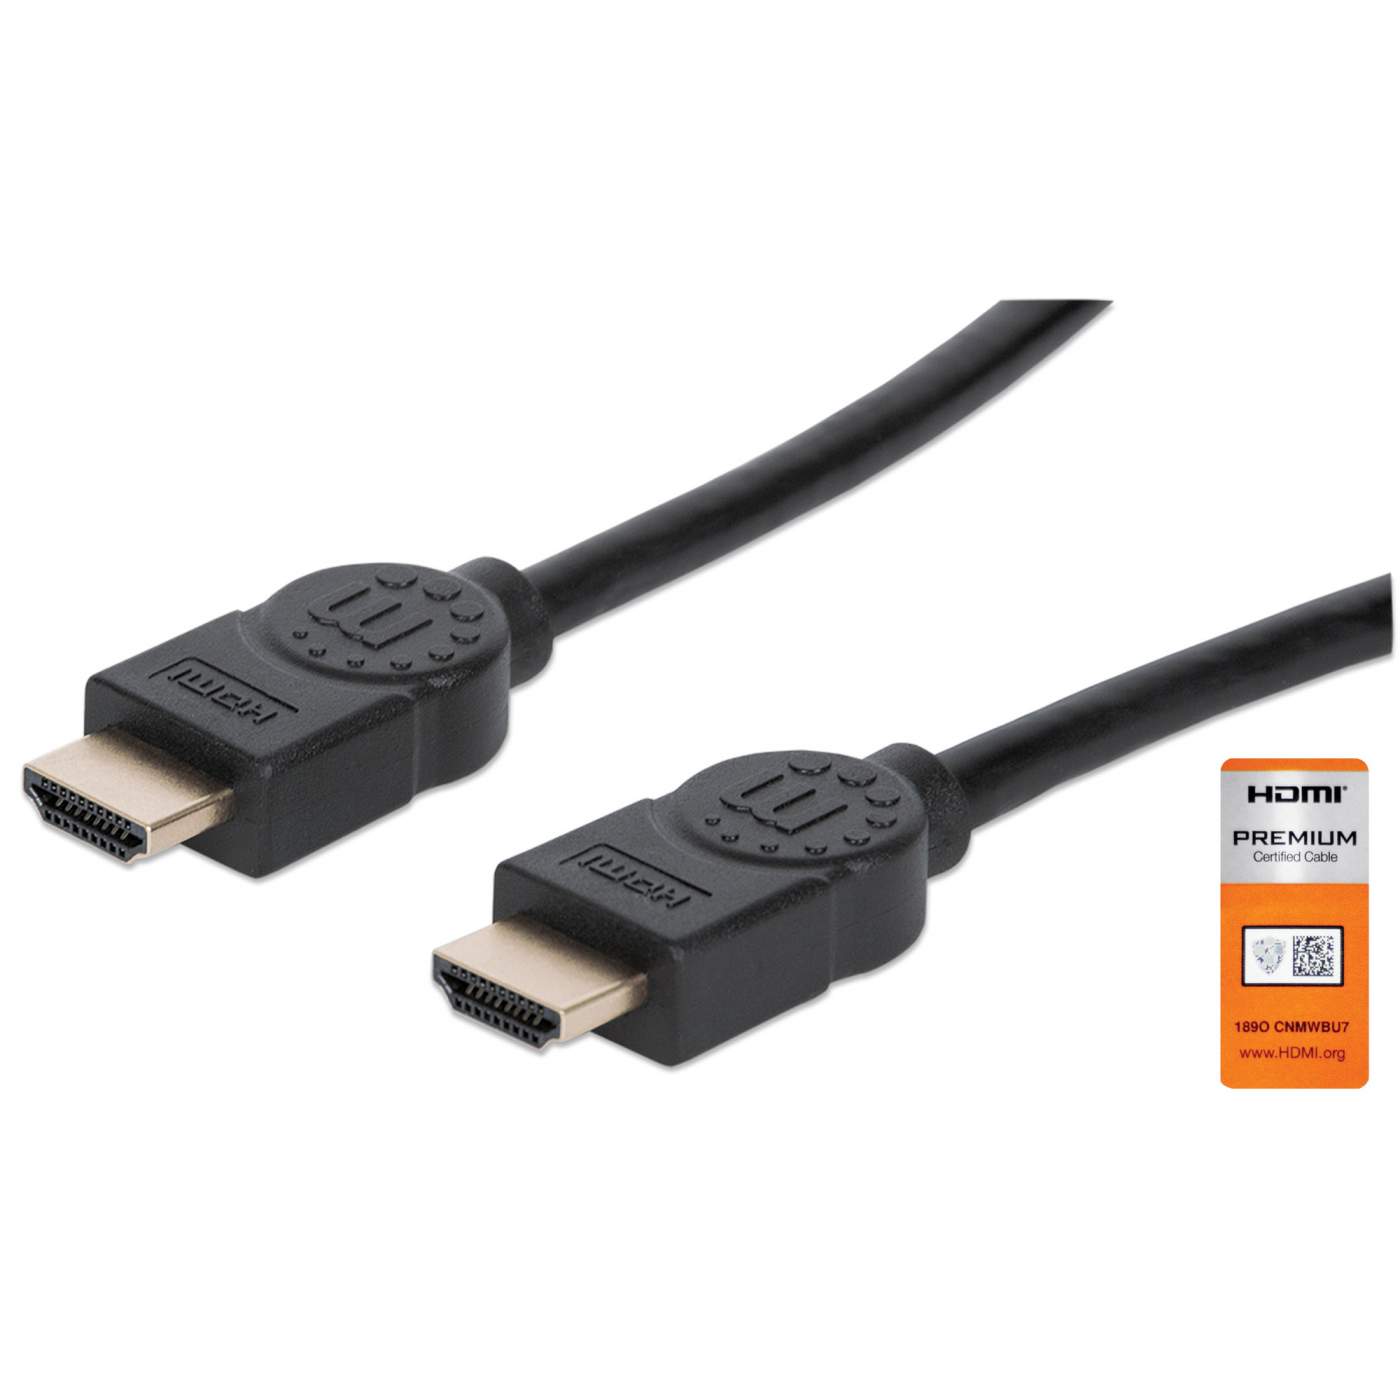 Certified Premium High Speed HDMI Cable with Ethernet Image 1